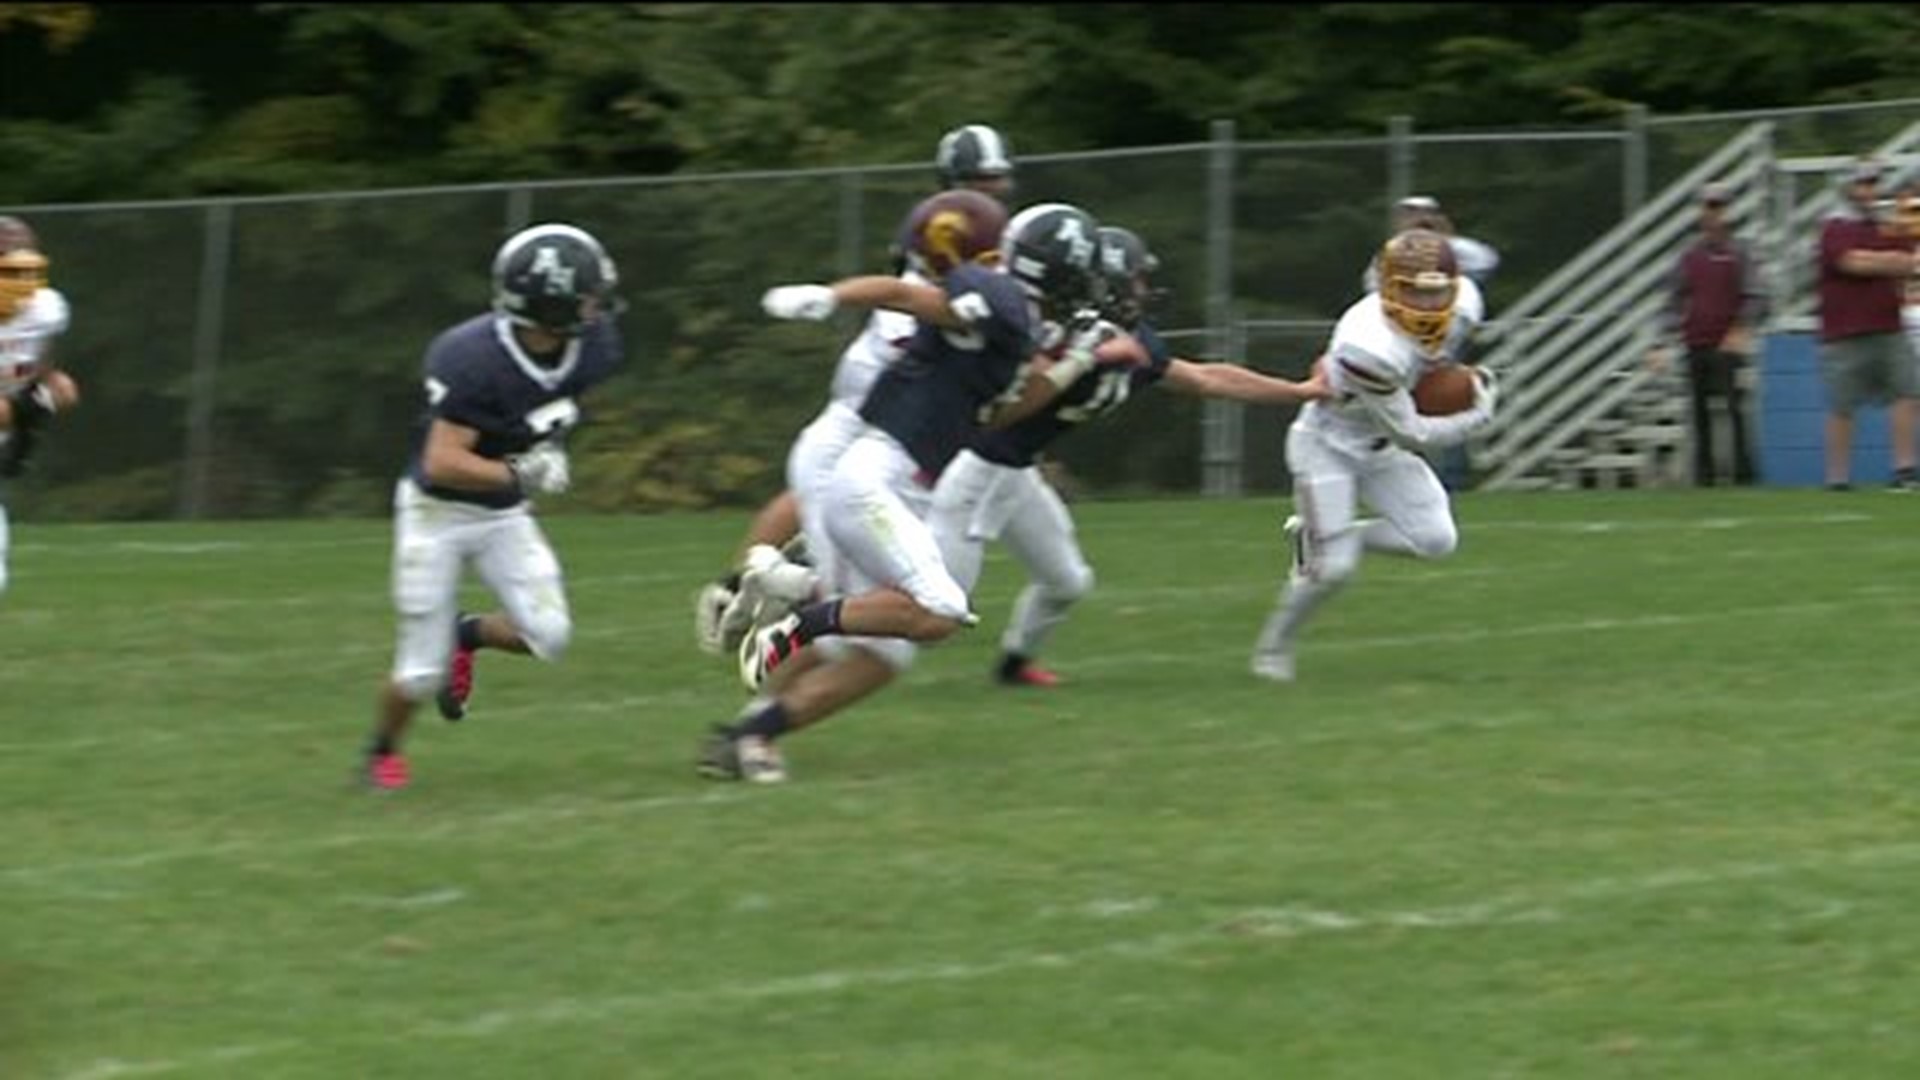 Wyoming Valley West Survives 23-20 at Abington Heights